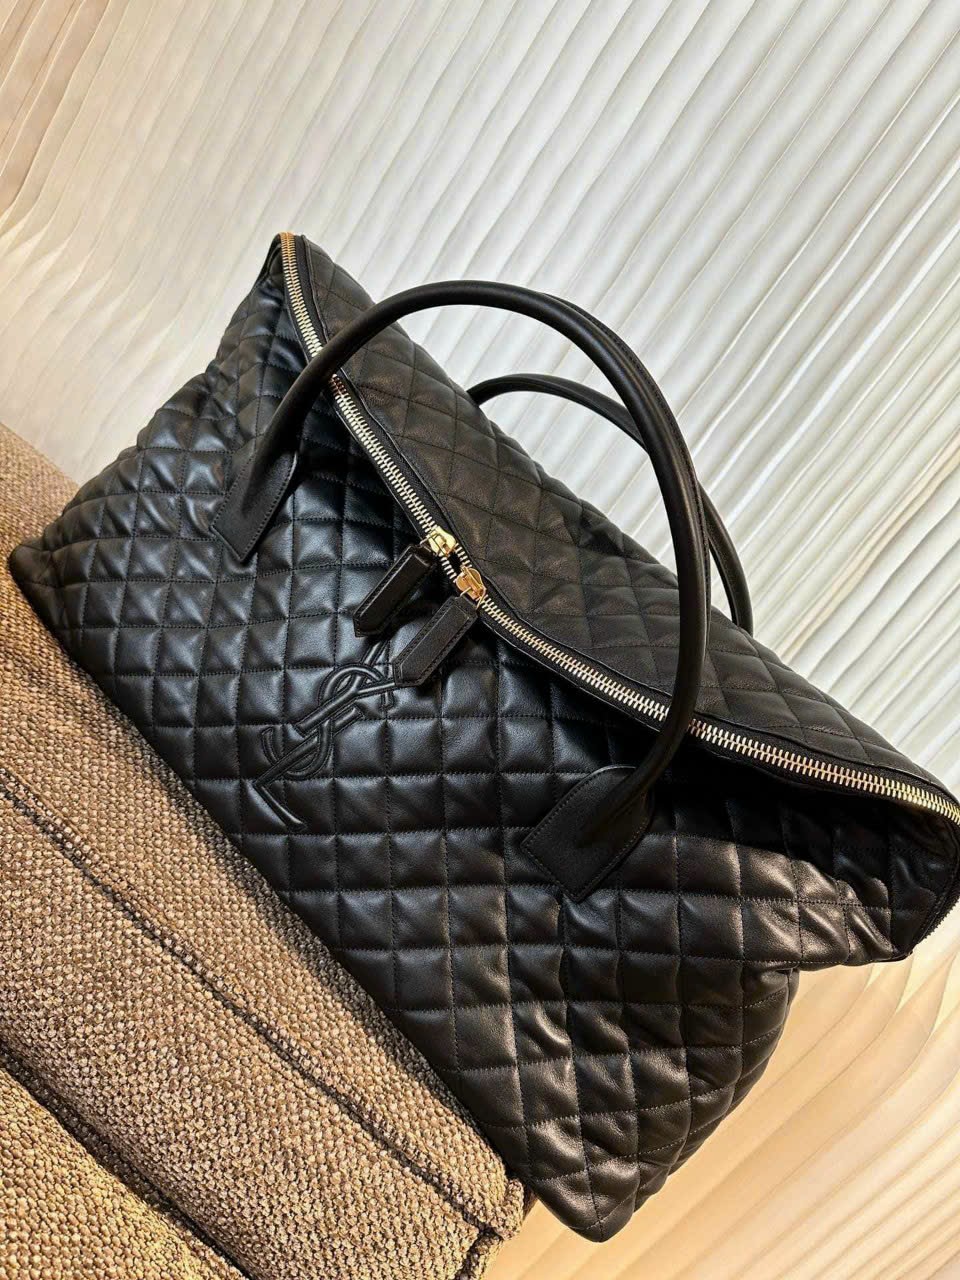 TÚI XÁCH DU LỊCH YSL ES GIANT TRAVEL BAG IN QUILTED LEATHER 2